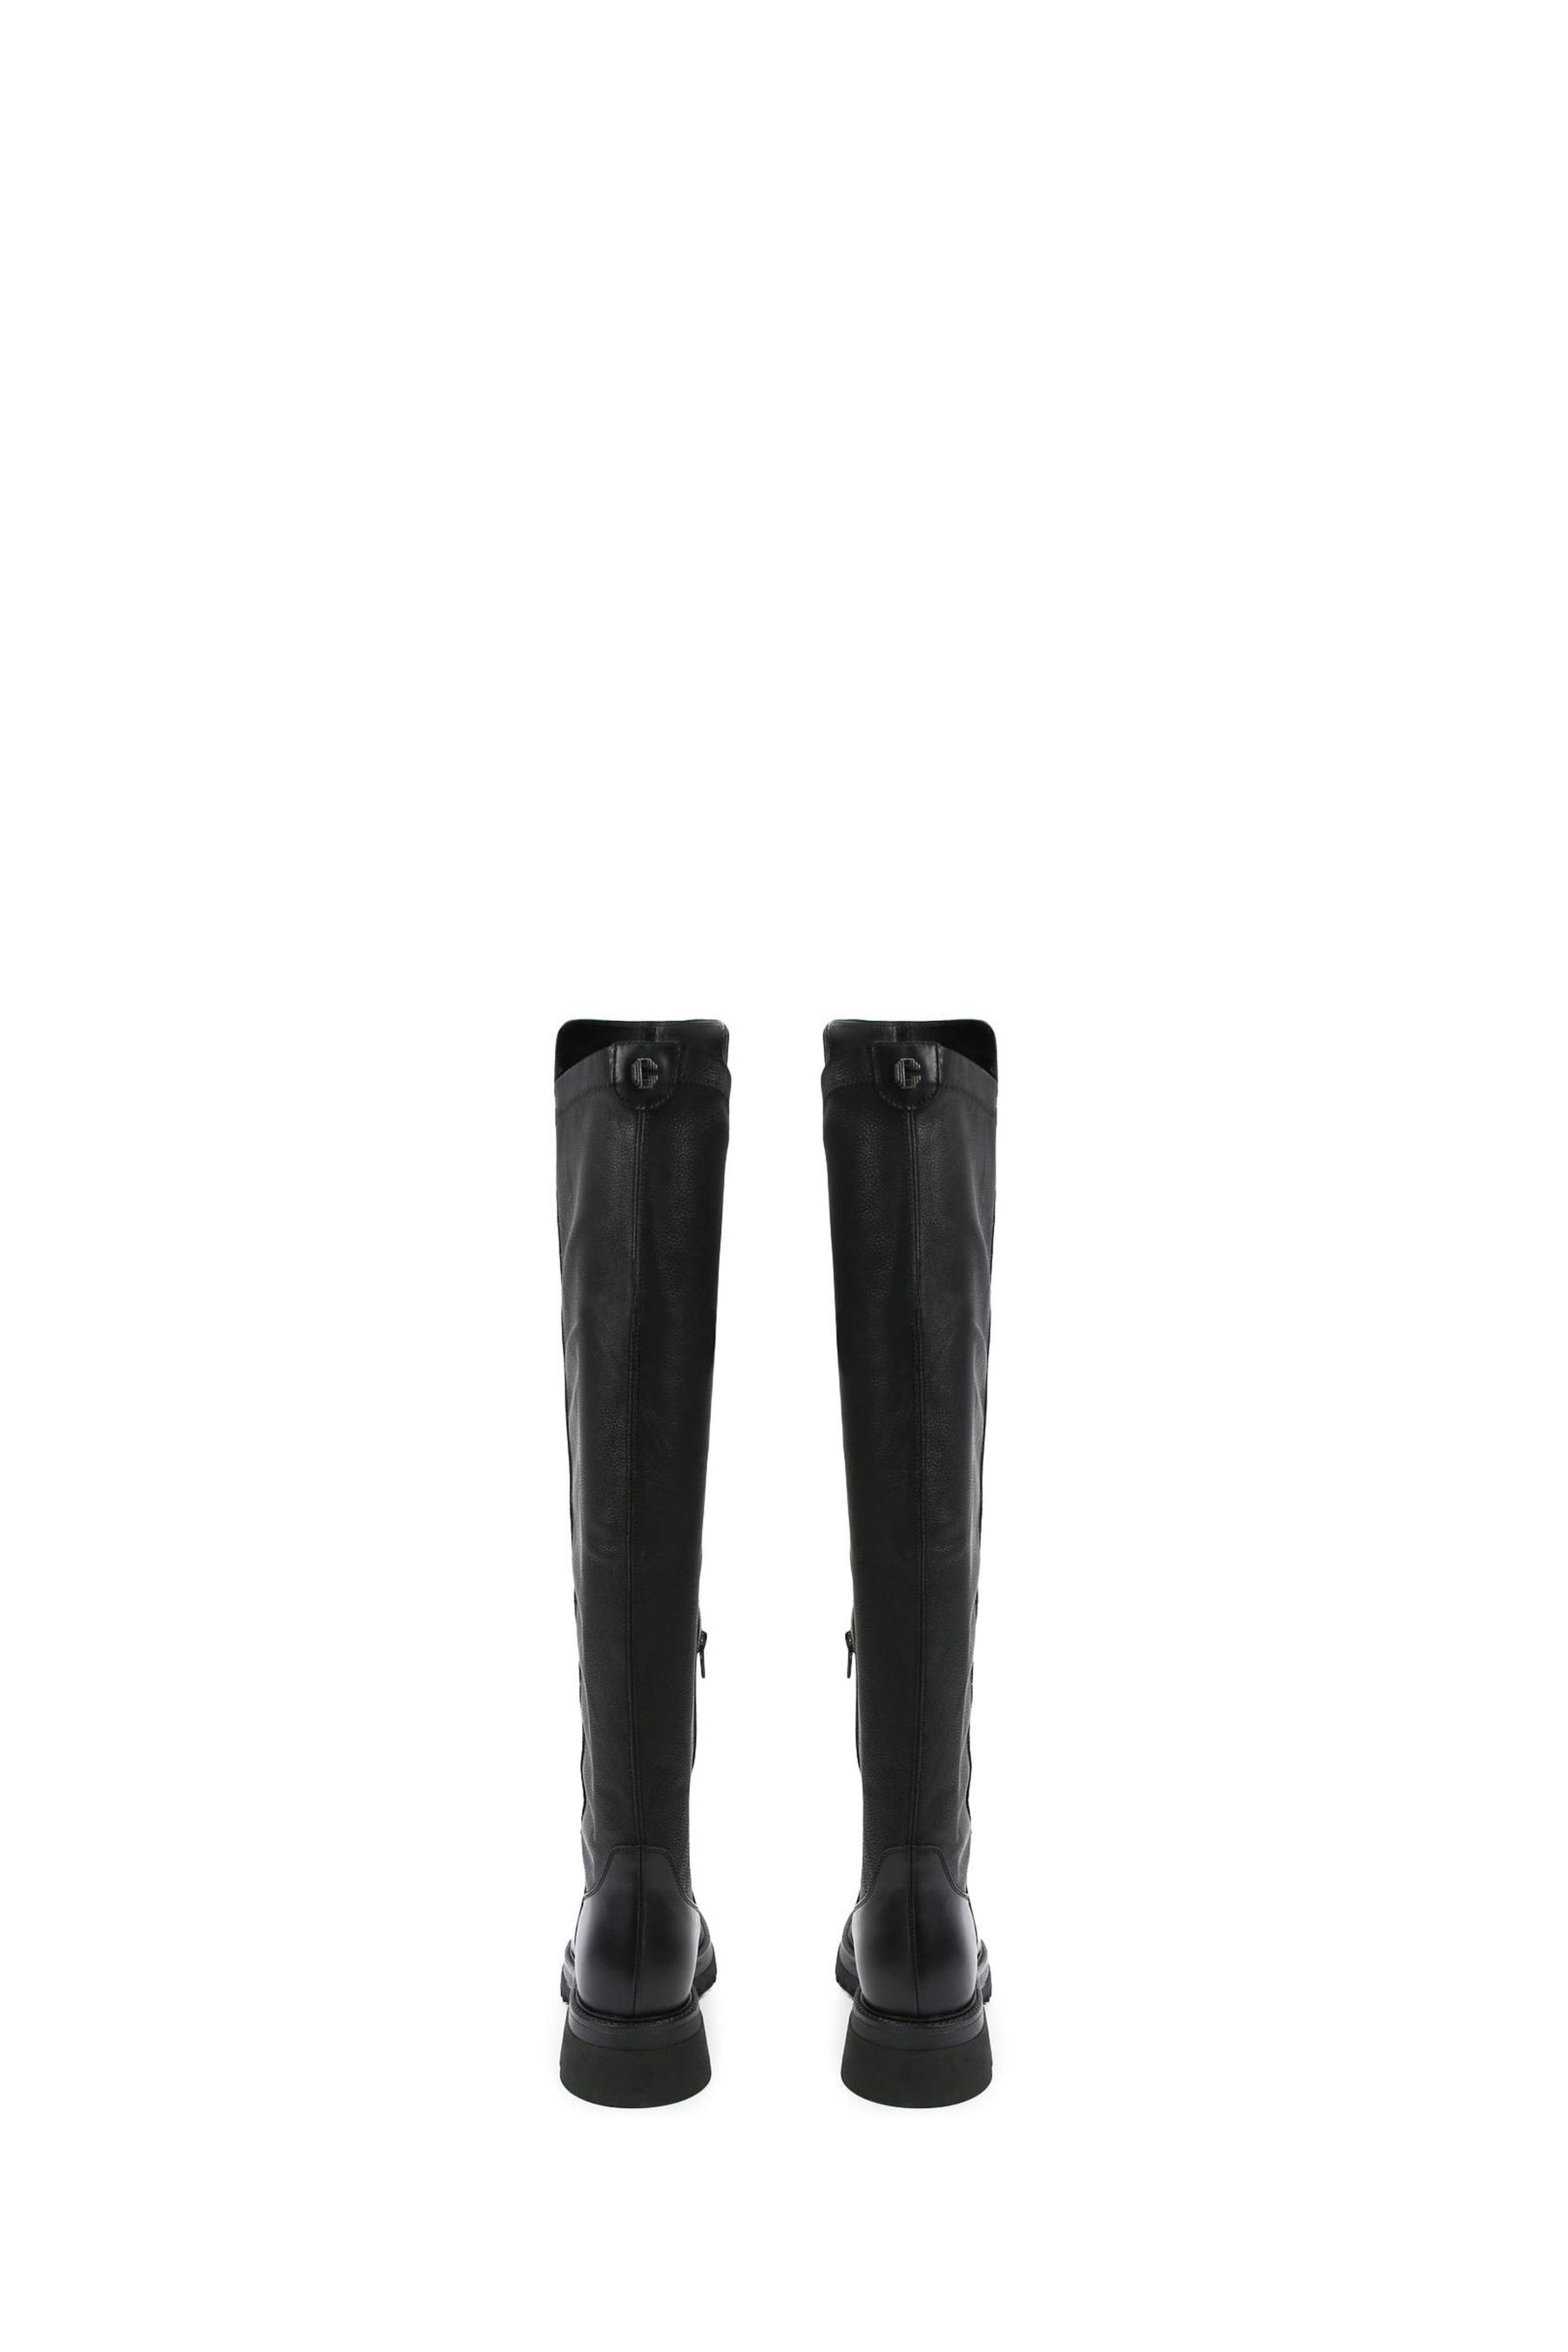 Buy Carvela Strong 50/50 Black Boots from the Next UK online shop